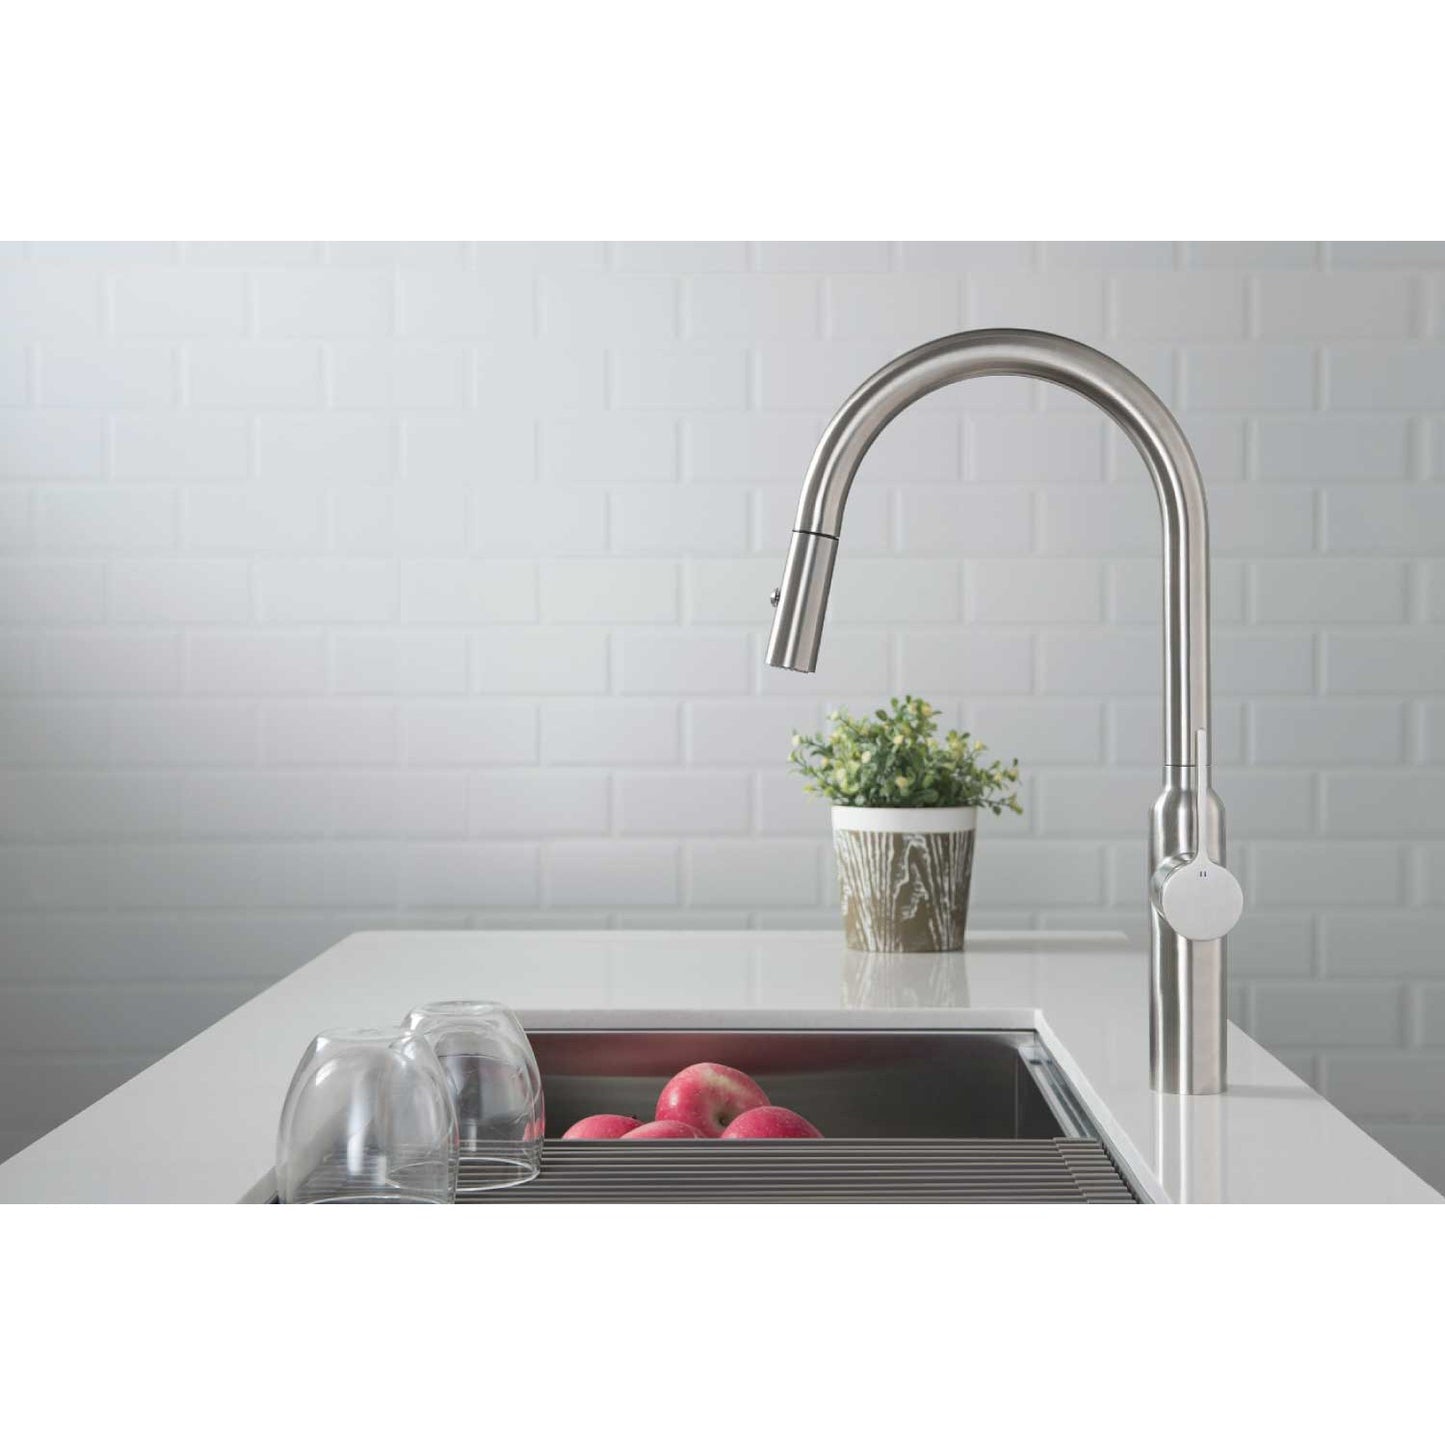 Isenberg Klassiker Ziel 17" Single Hole Army Green Stainless Steel Pull-Down Kitchen Faucet With Dual Function Sprayer